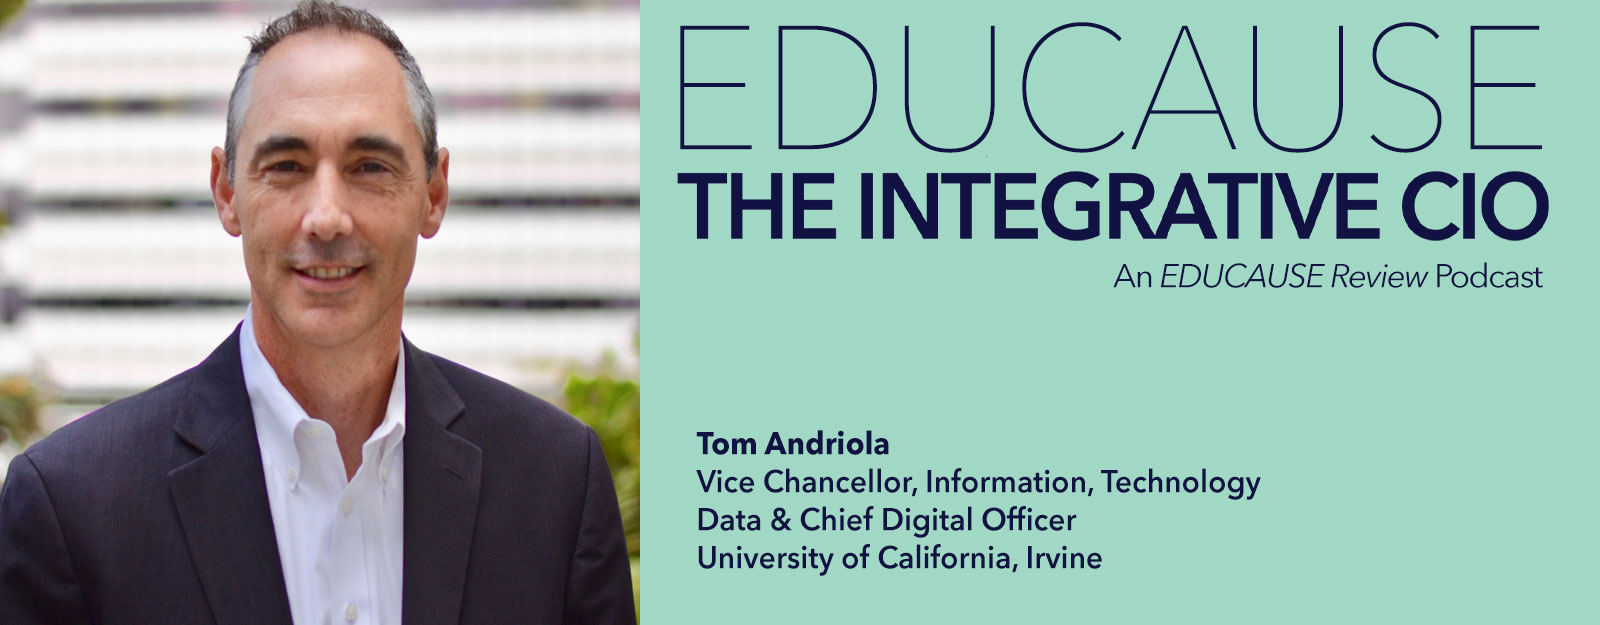 Tom Andriola on the Role of Trust in Leadership